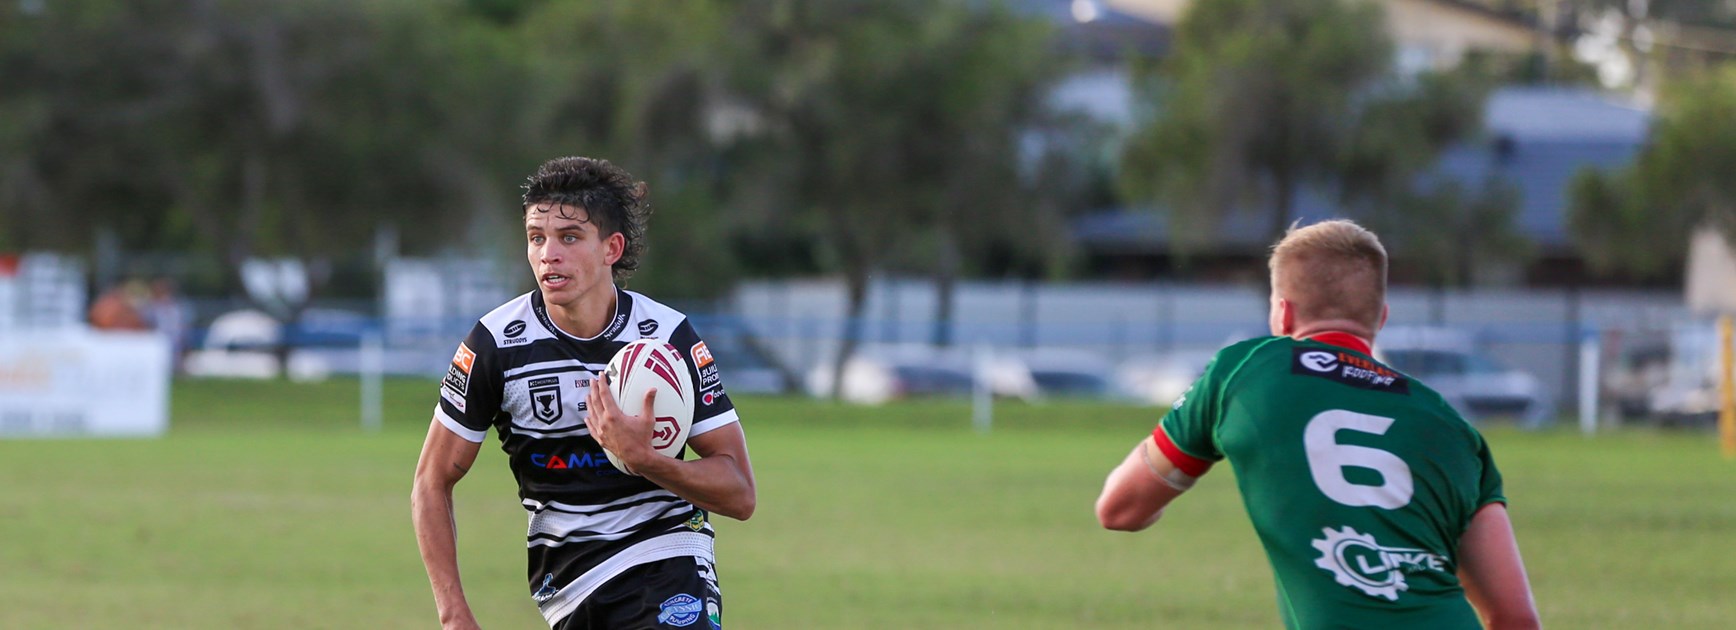 Affiliate Wrap: Campbell and McIntyre shine for Tweed in tight defeat to Wynnum